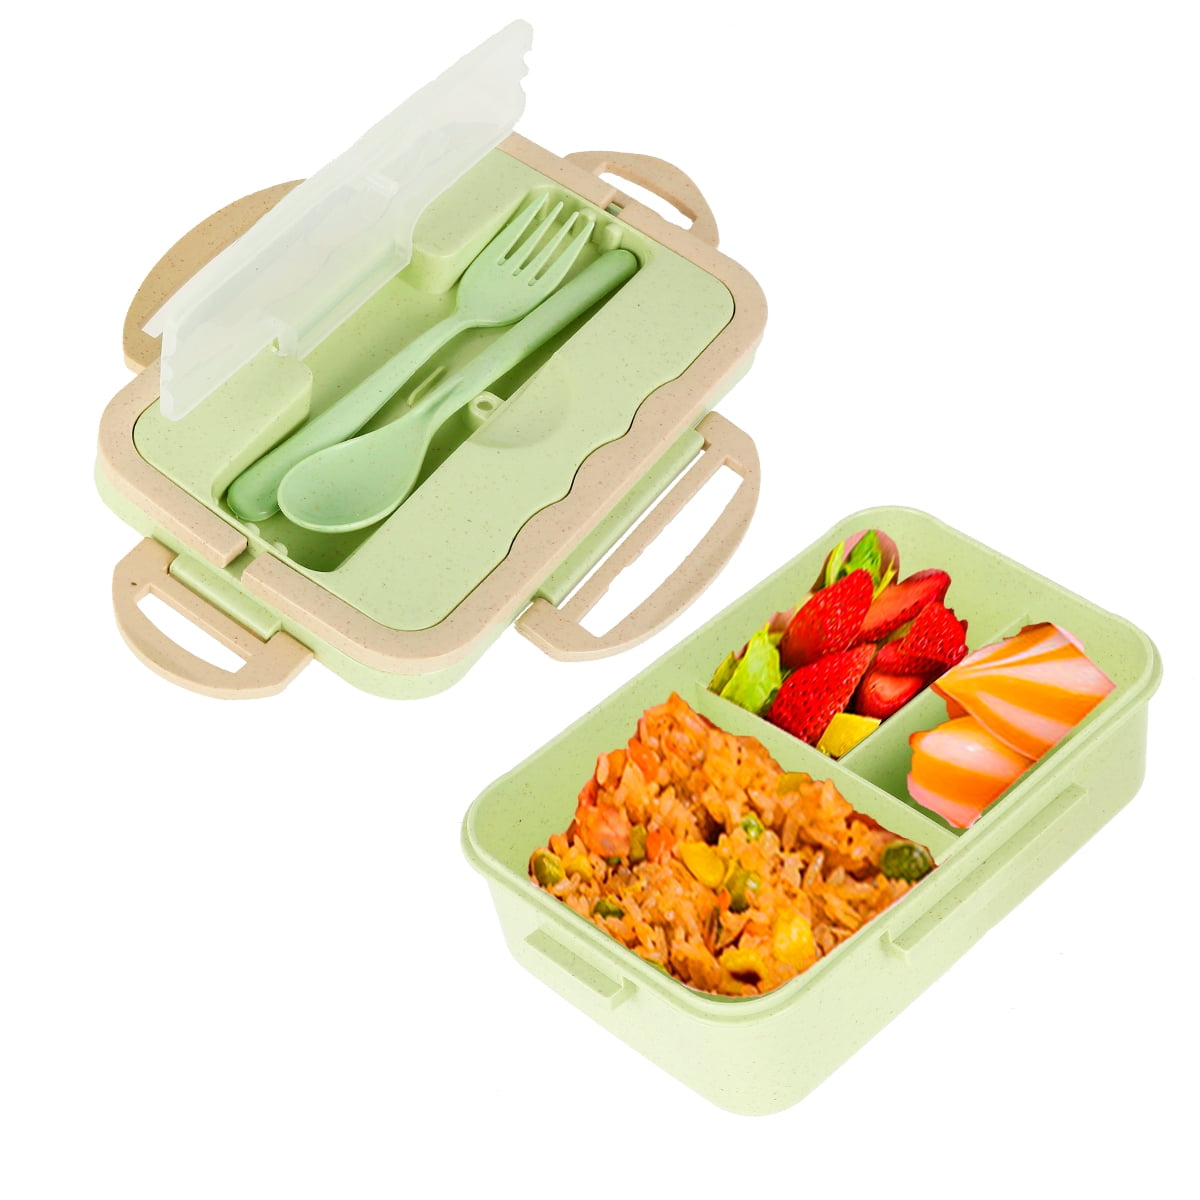 Stainless Steel Thermal Insulated Lunch Box 3 Grid Bento Food Container Storage 